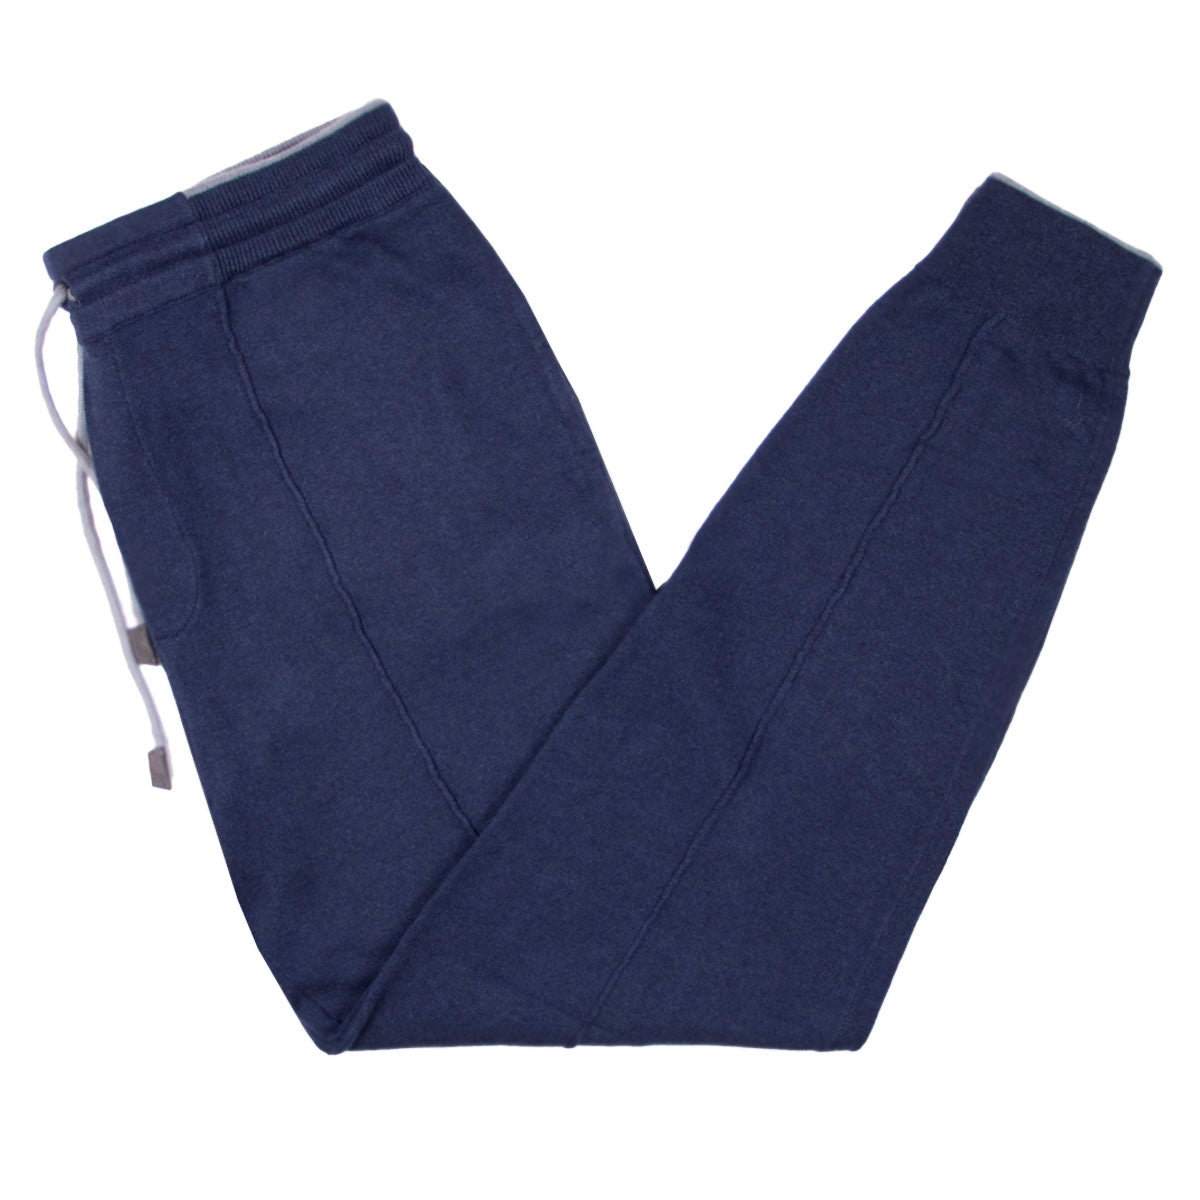 Navy Cotton & Cashmere Contrast Knitted Joggers  Robert Old   